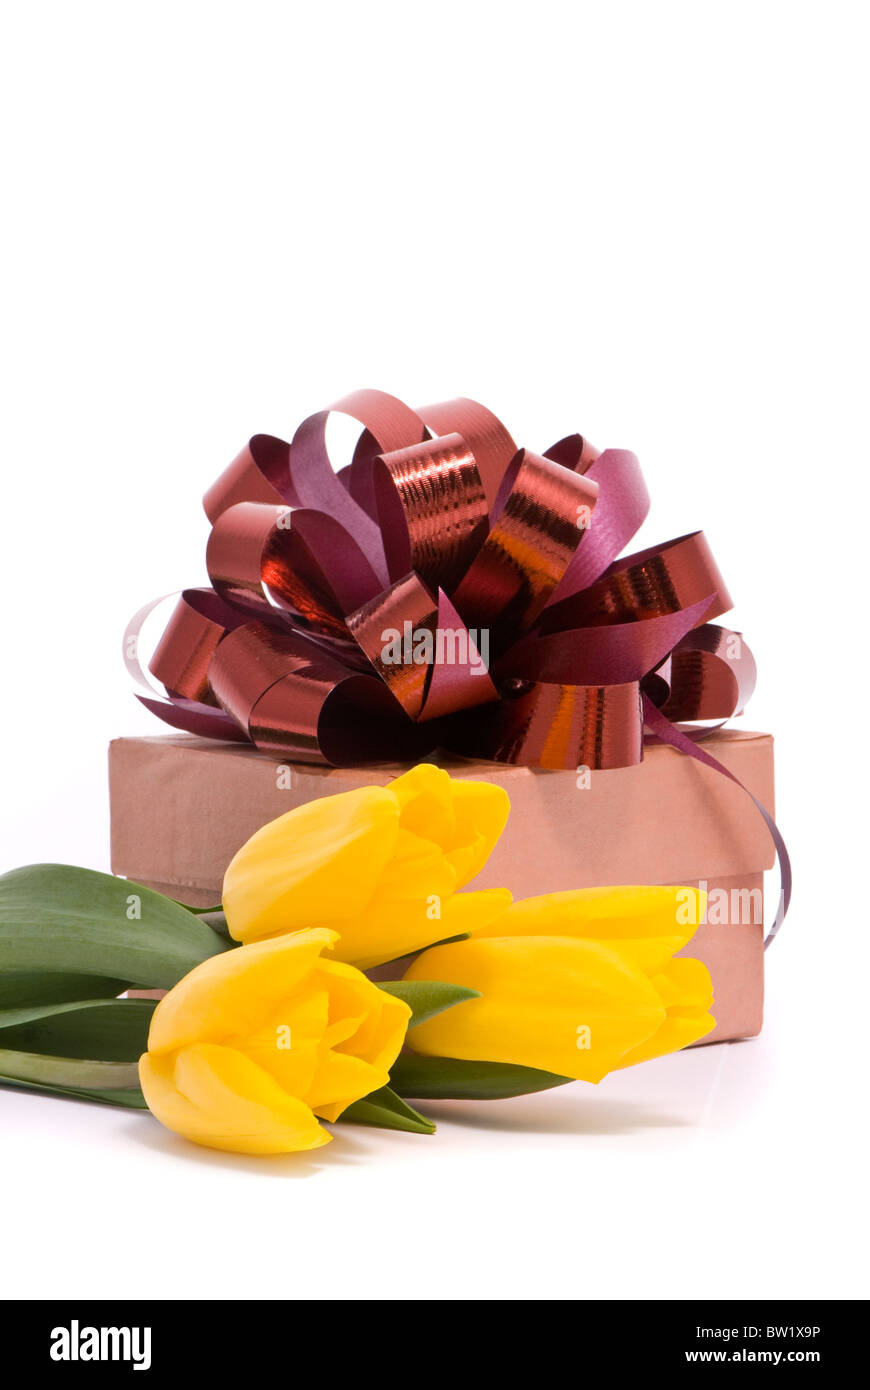 Yellow tulips and gift box on a white background Stock Photo